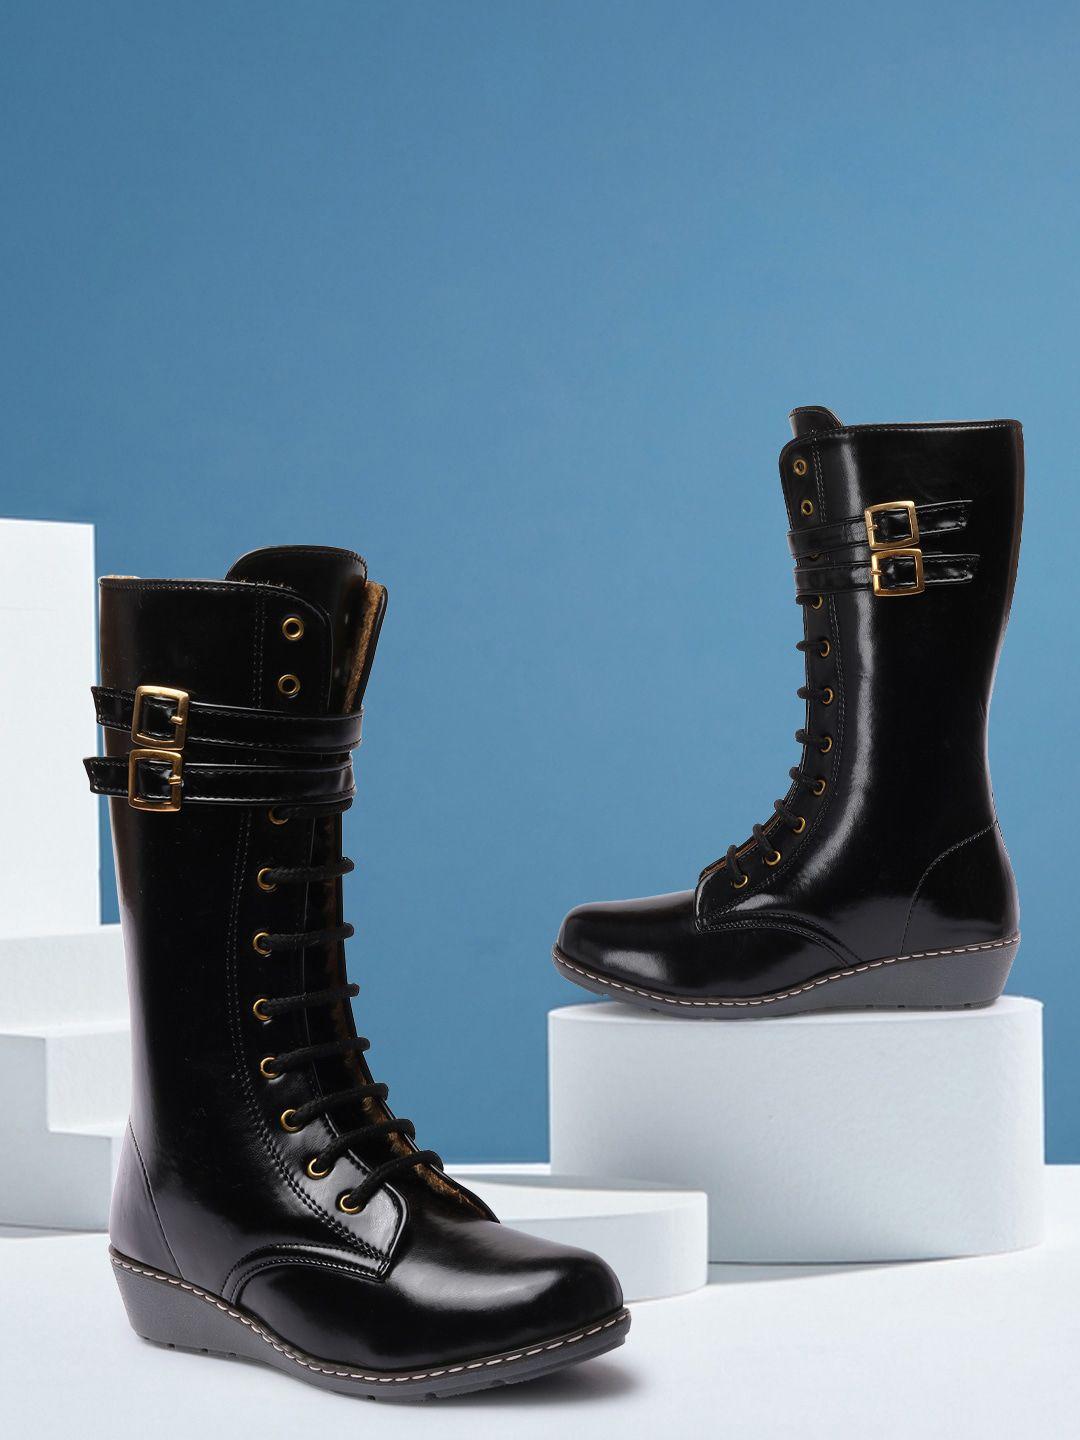 the roadster lifestyle co. women black high top wedges winter boots with buckle detail